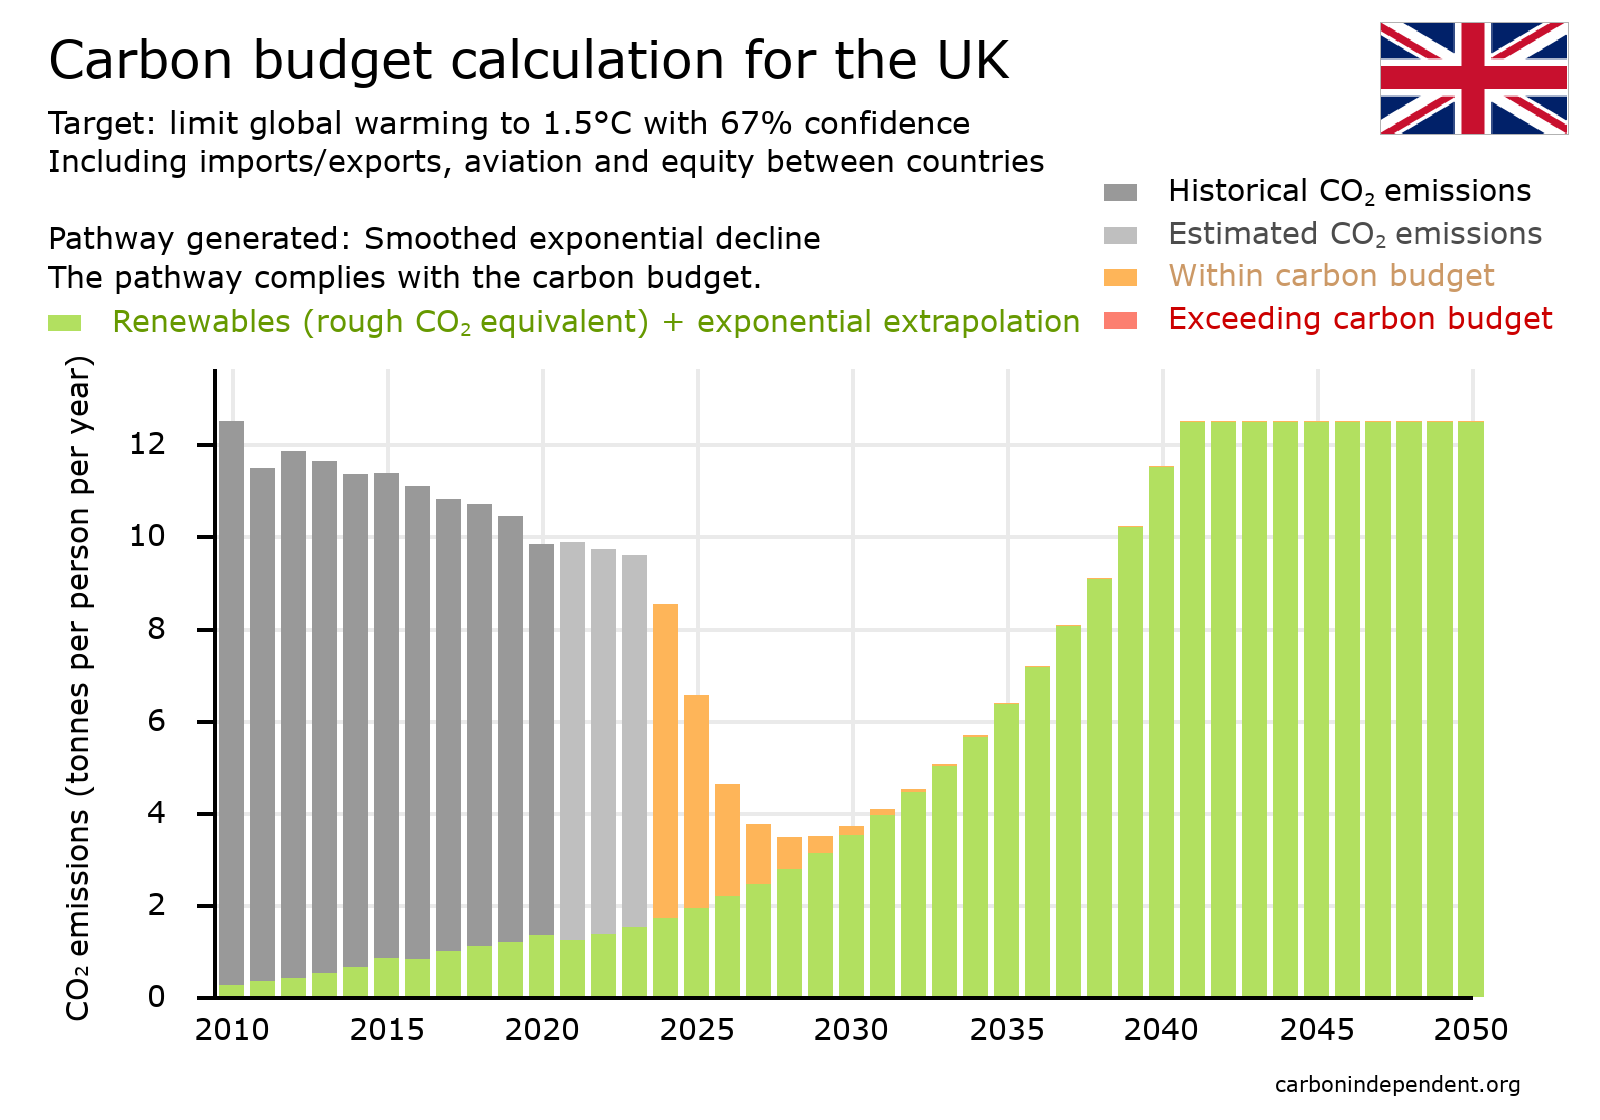 UK Paris-compliant carbon budget chart smoothed exponential decline with renewable energy